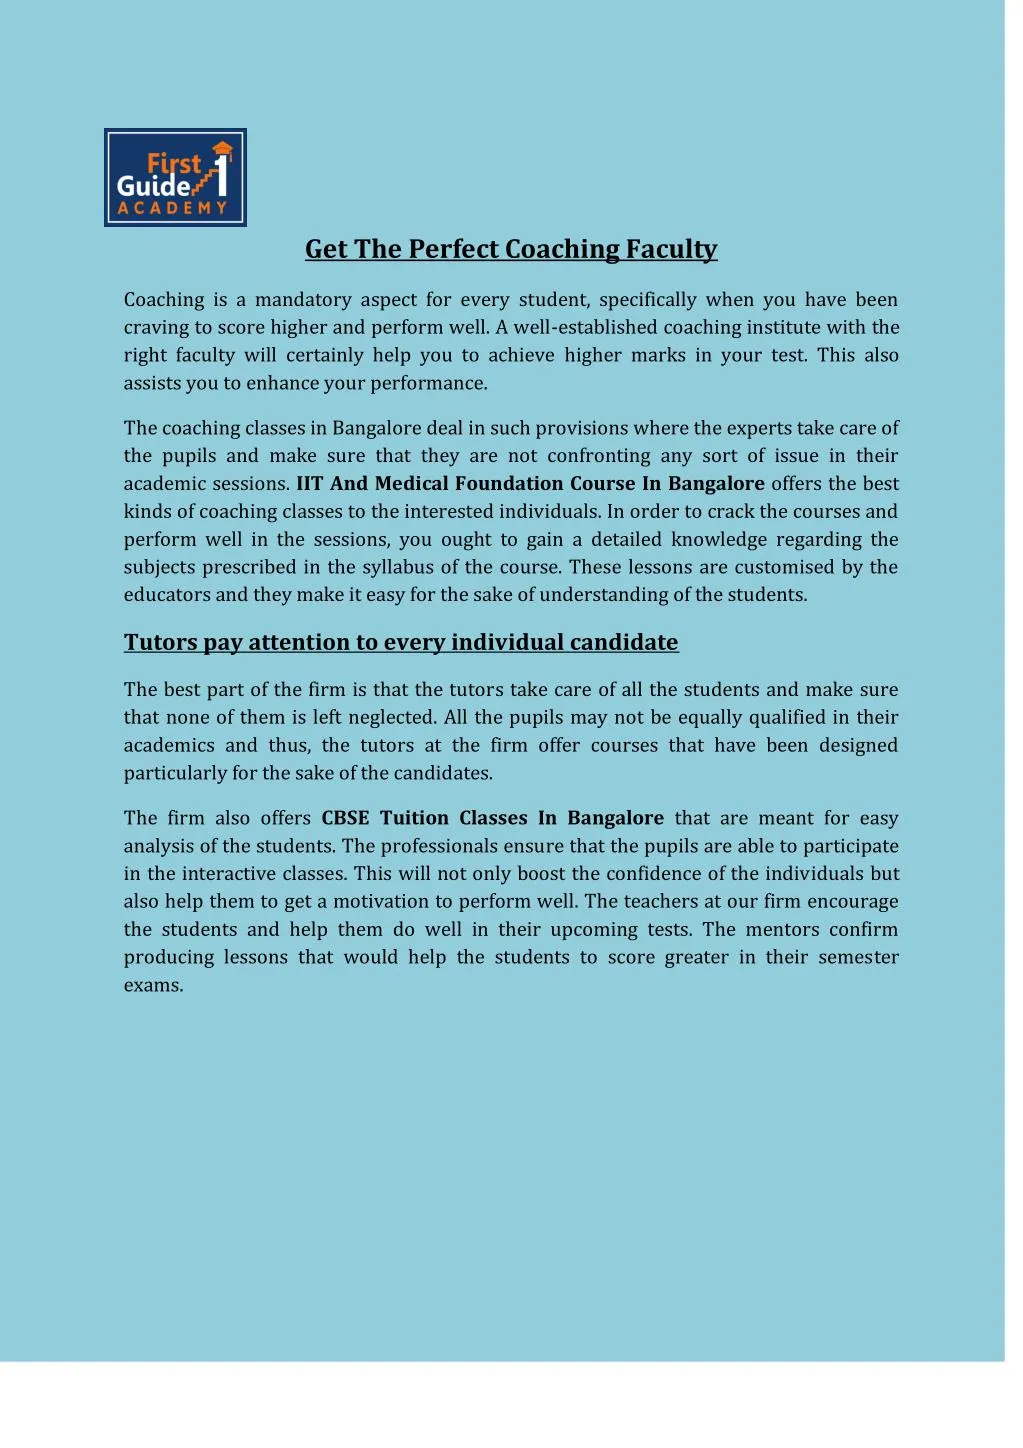 get the perfect coaching faculty